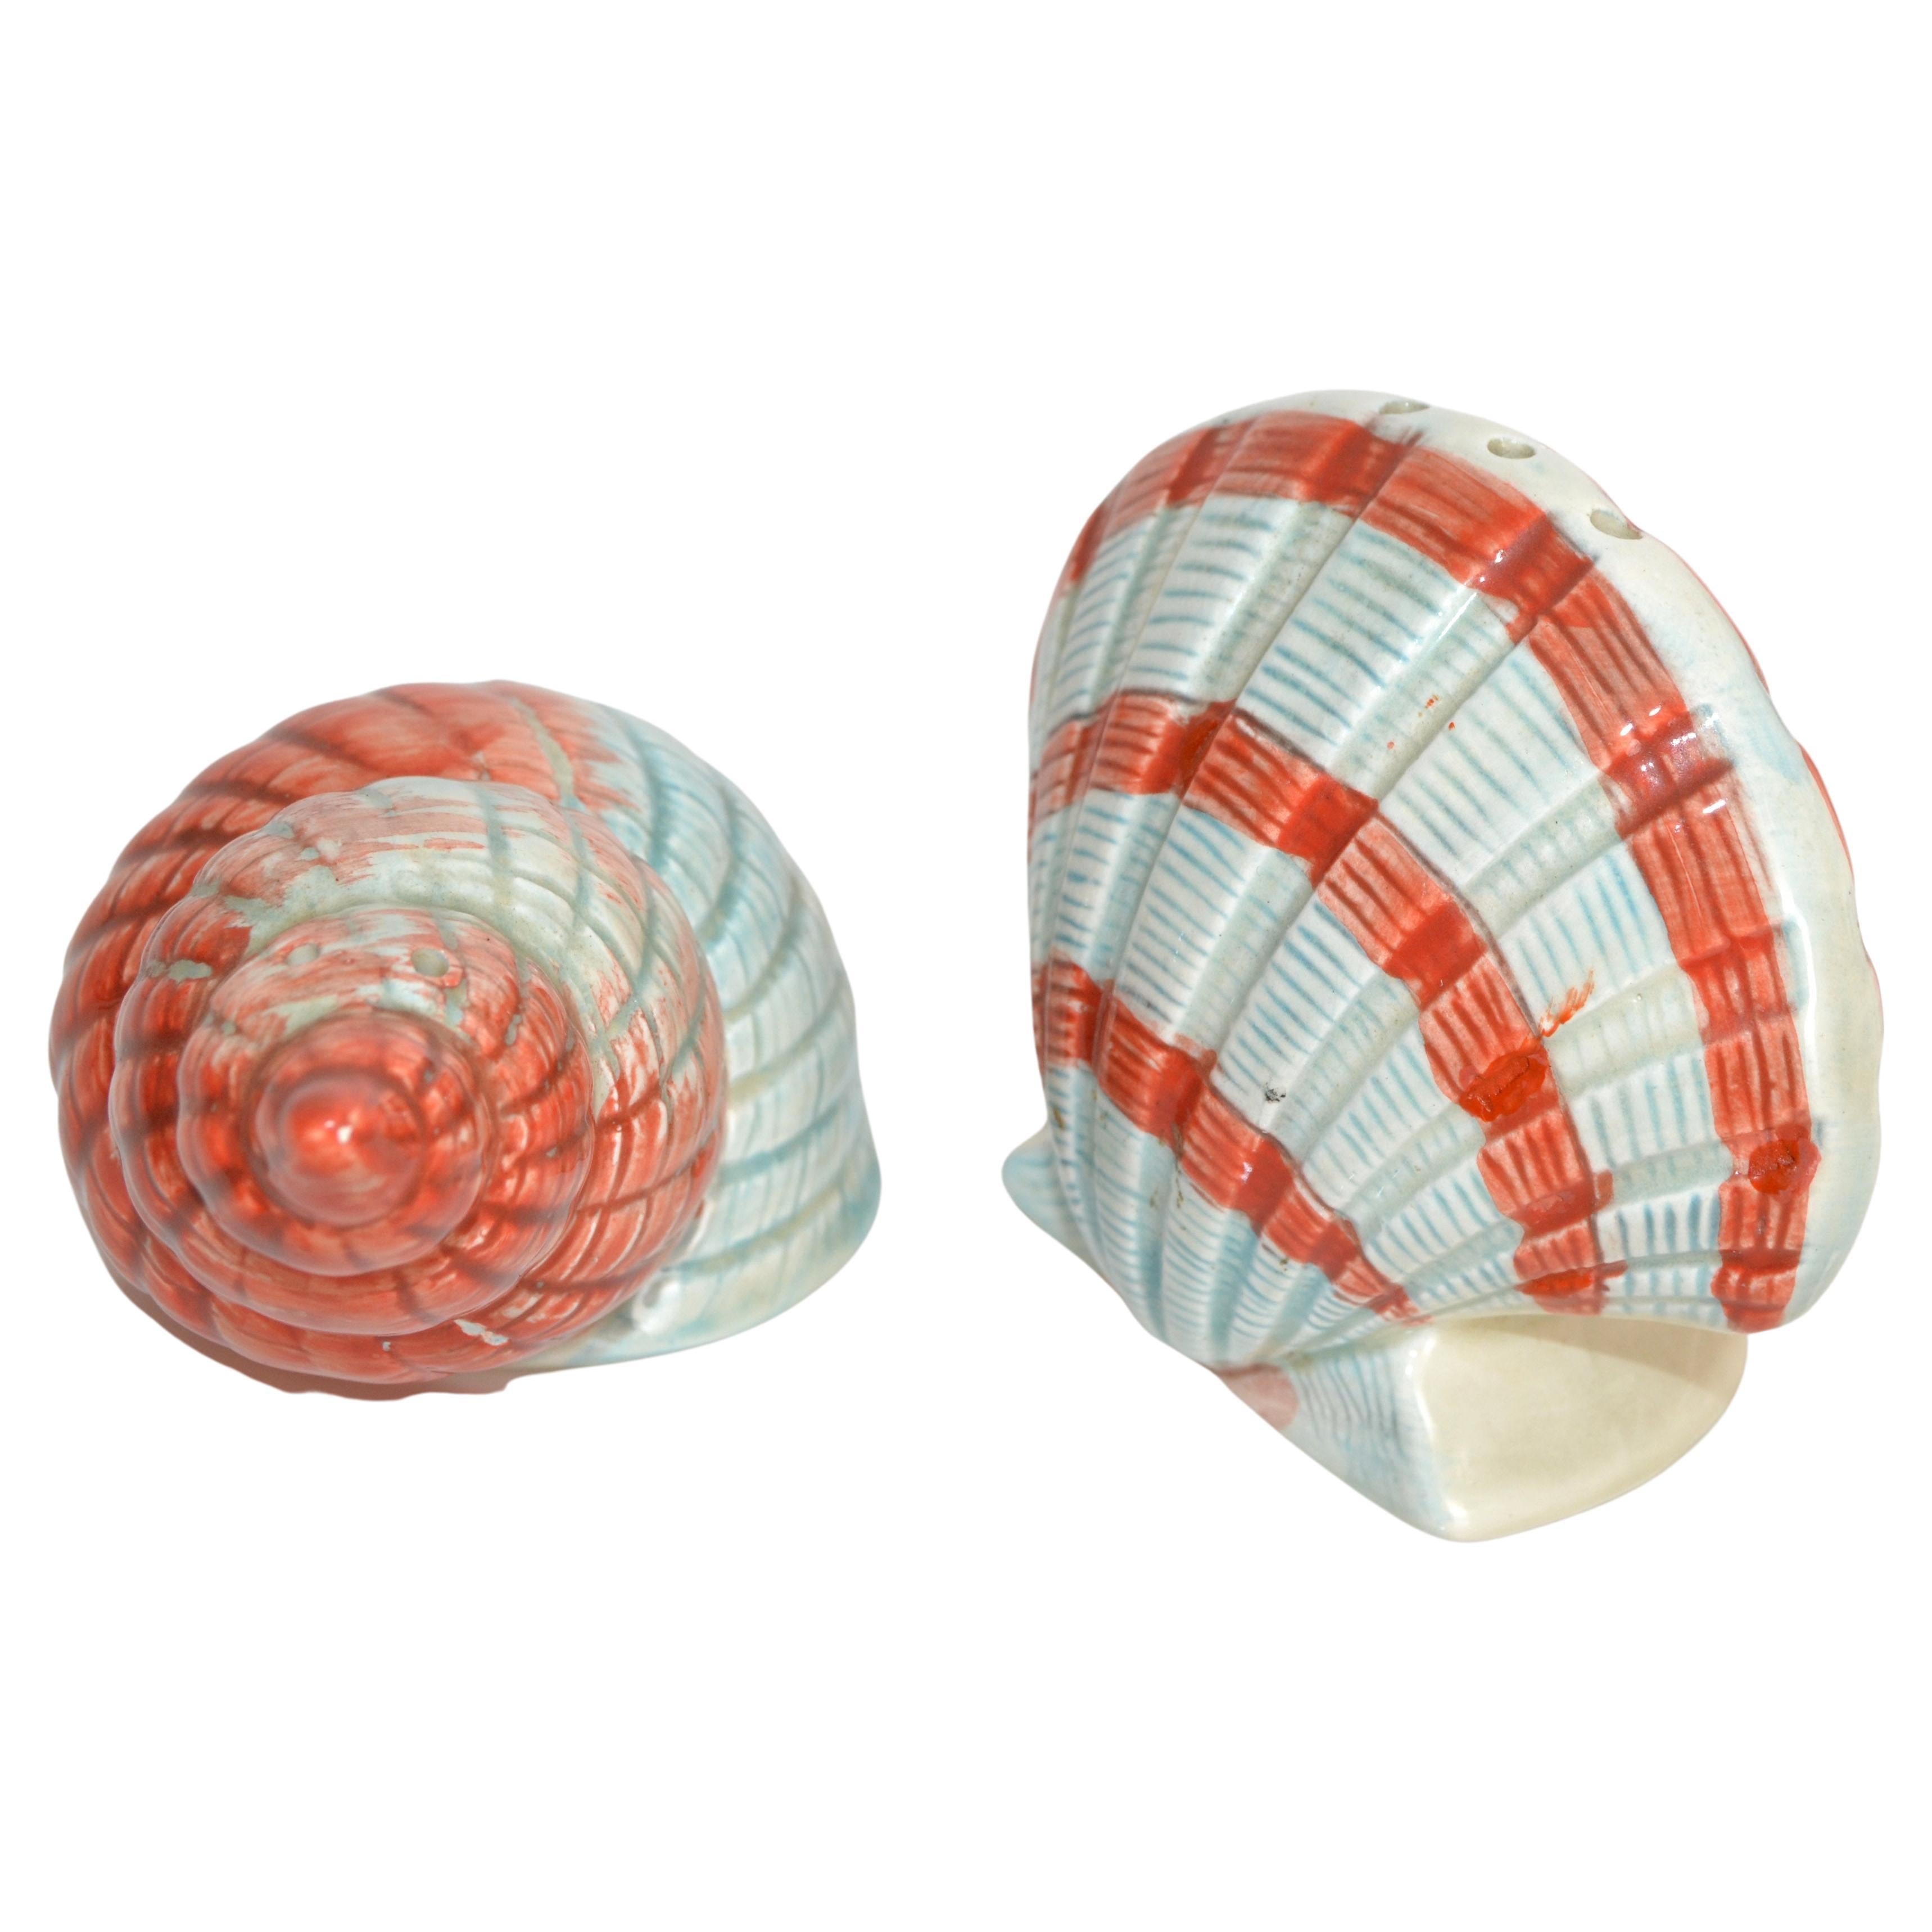 Vintage Hand-Painted Ceramic Nautical Seashell Salt & Pepper Shakers Collectible For Sale